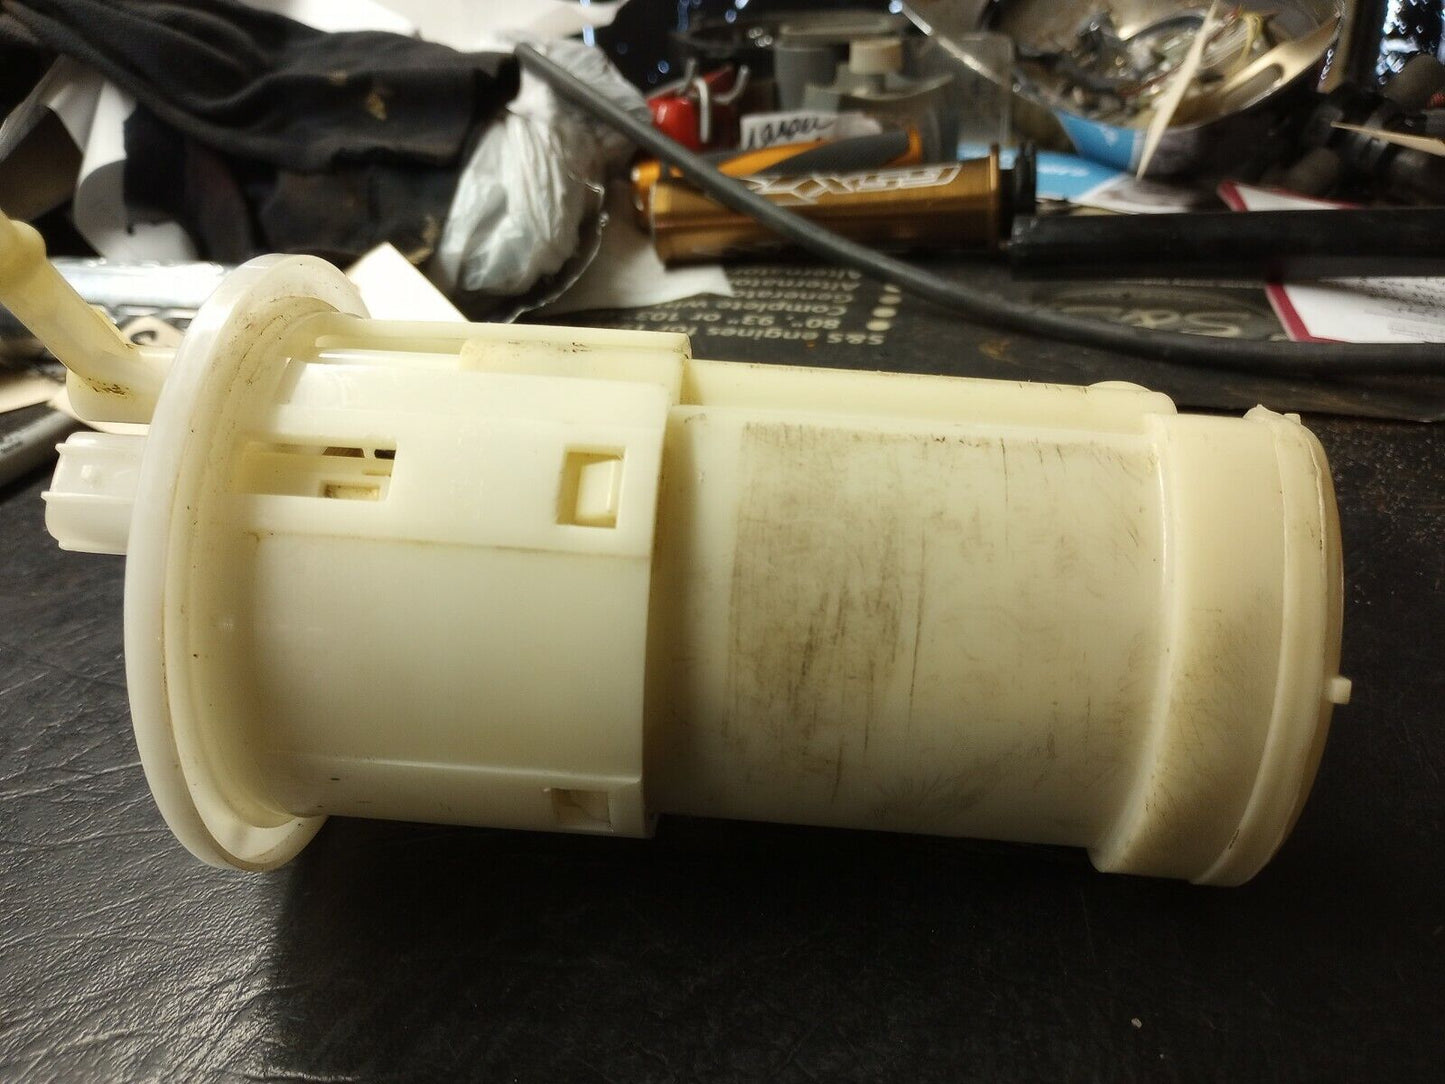 09-17 Yamaha FZ6R Fuel Pump REBUILT not used 20S-13907-01-00 core credit avail